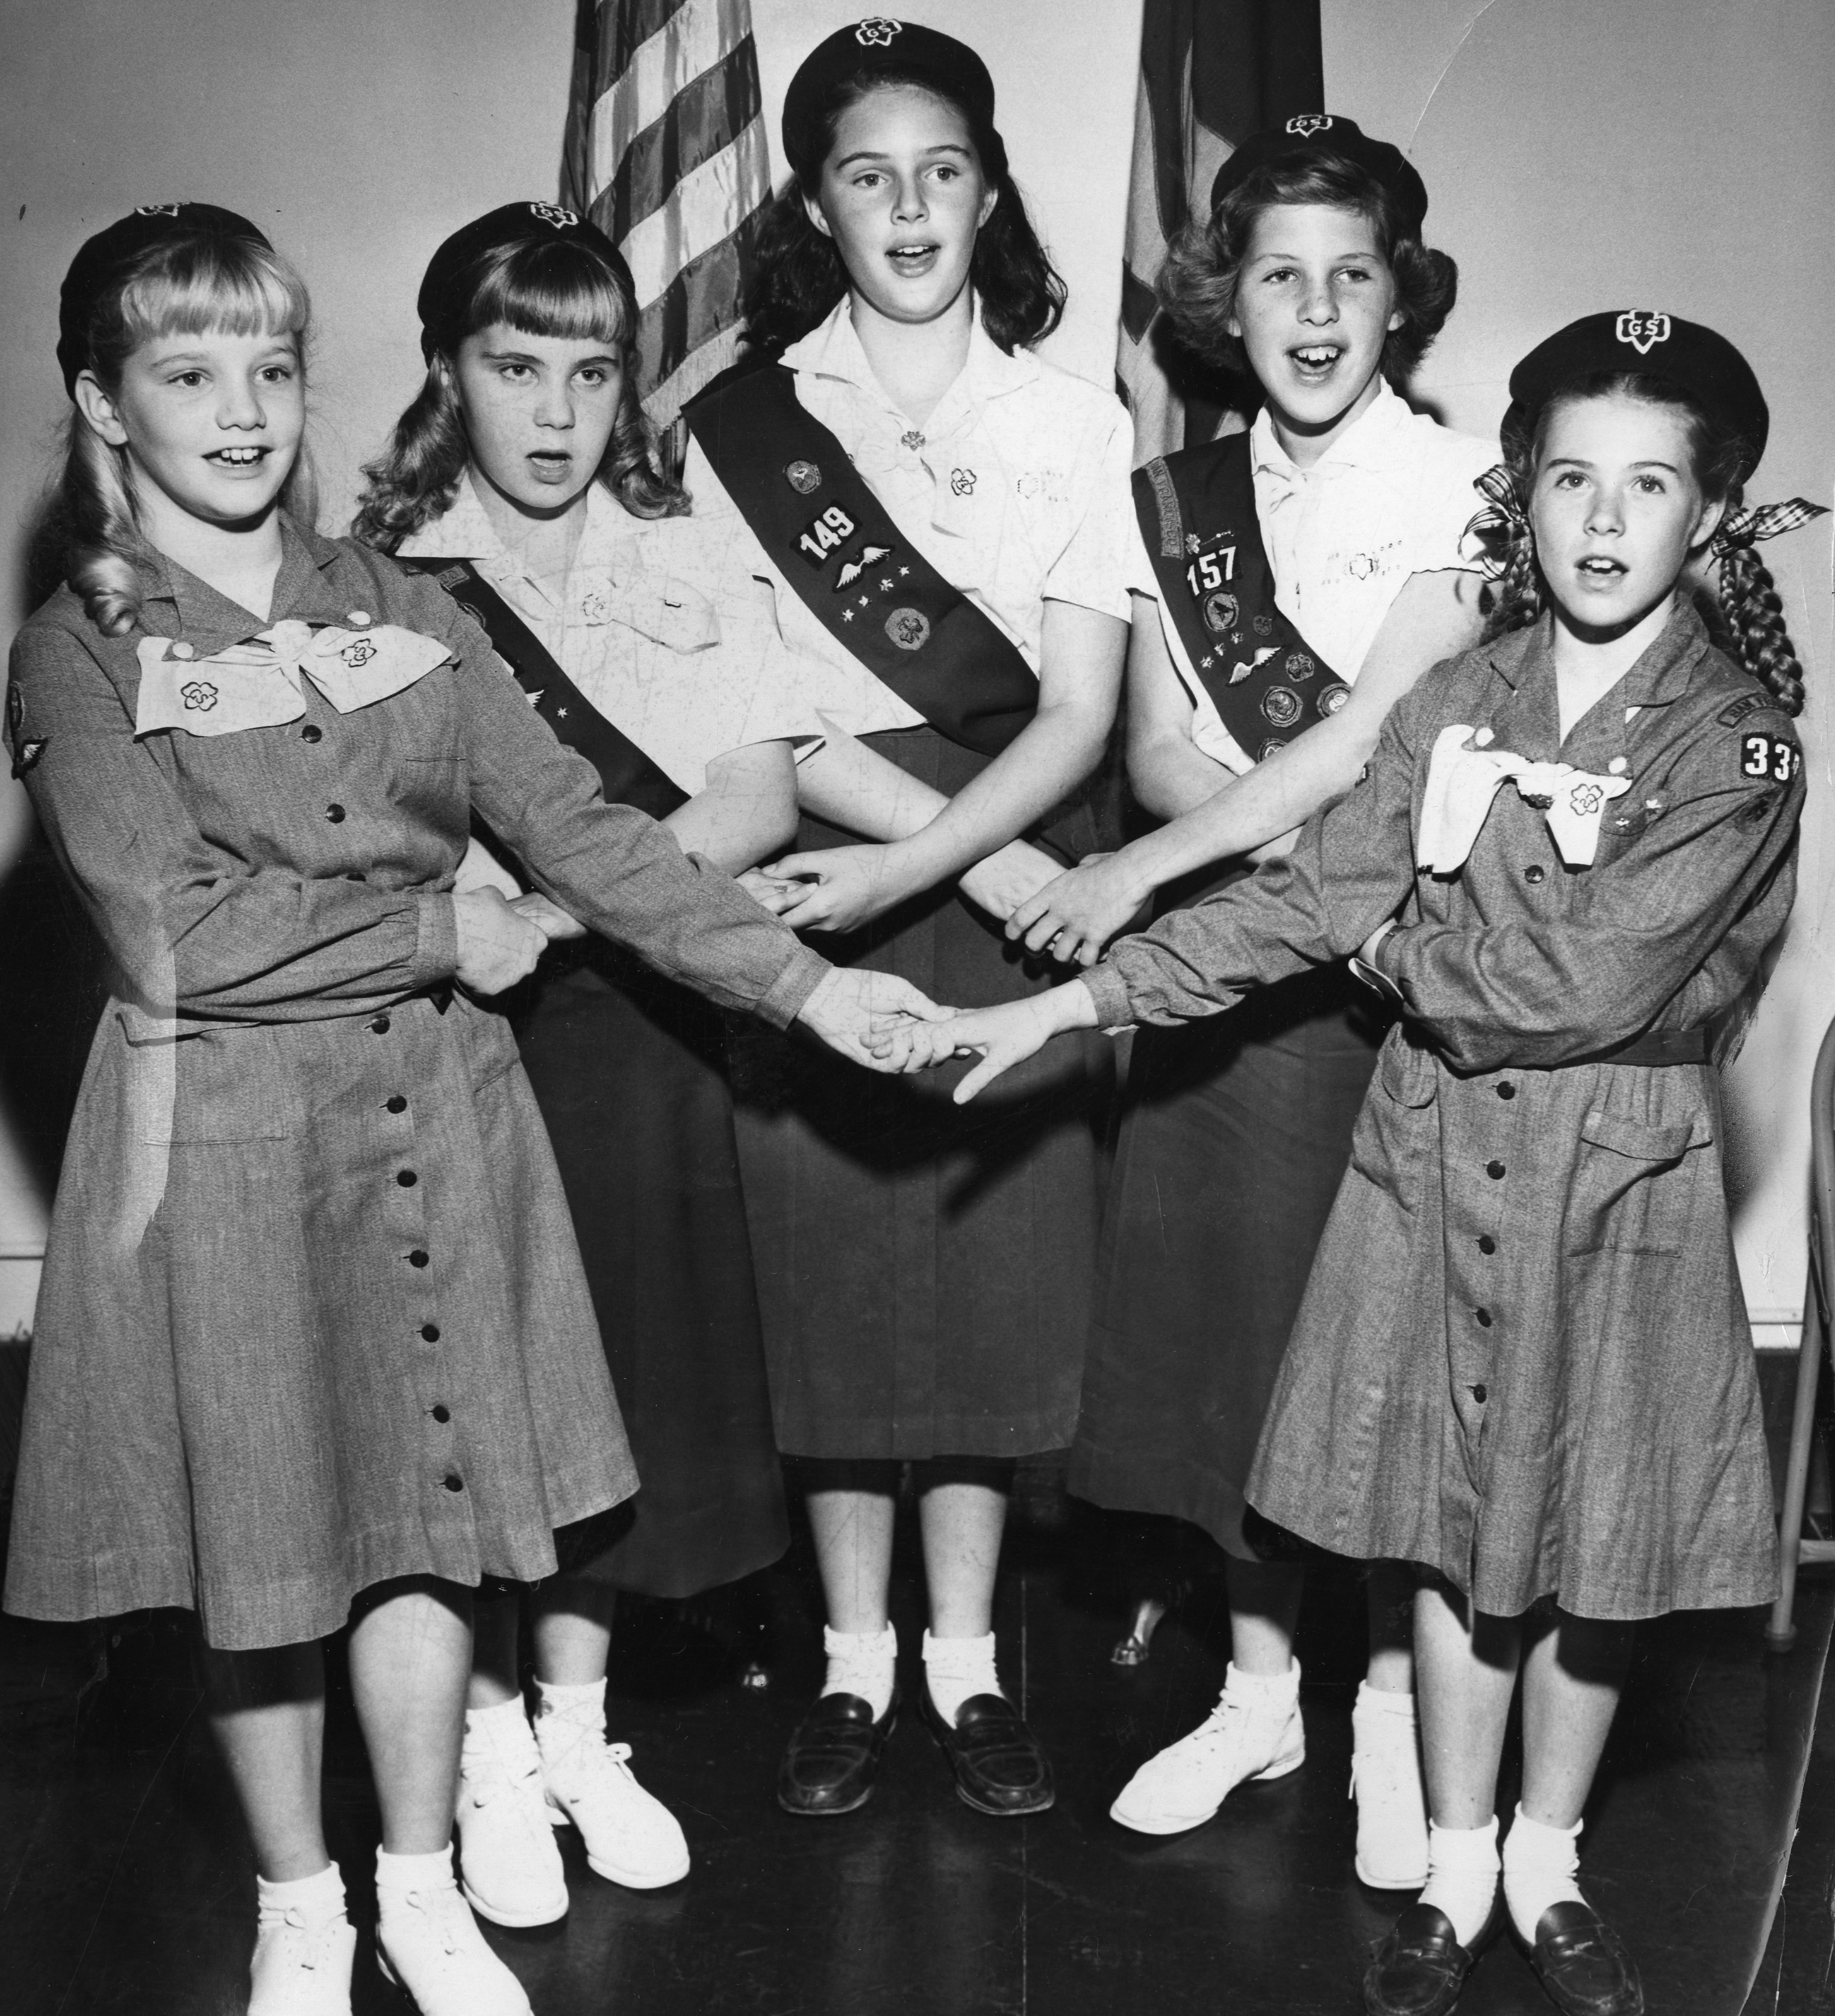 Girl Scouts sing during a talent show. Michelle Gerelli, Joan Allegretti, Carole Keyworth, Michal Cox and Linda Hunt (Right) on 15 October 1952 | Source: Getty Images